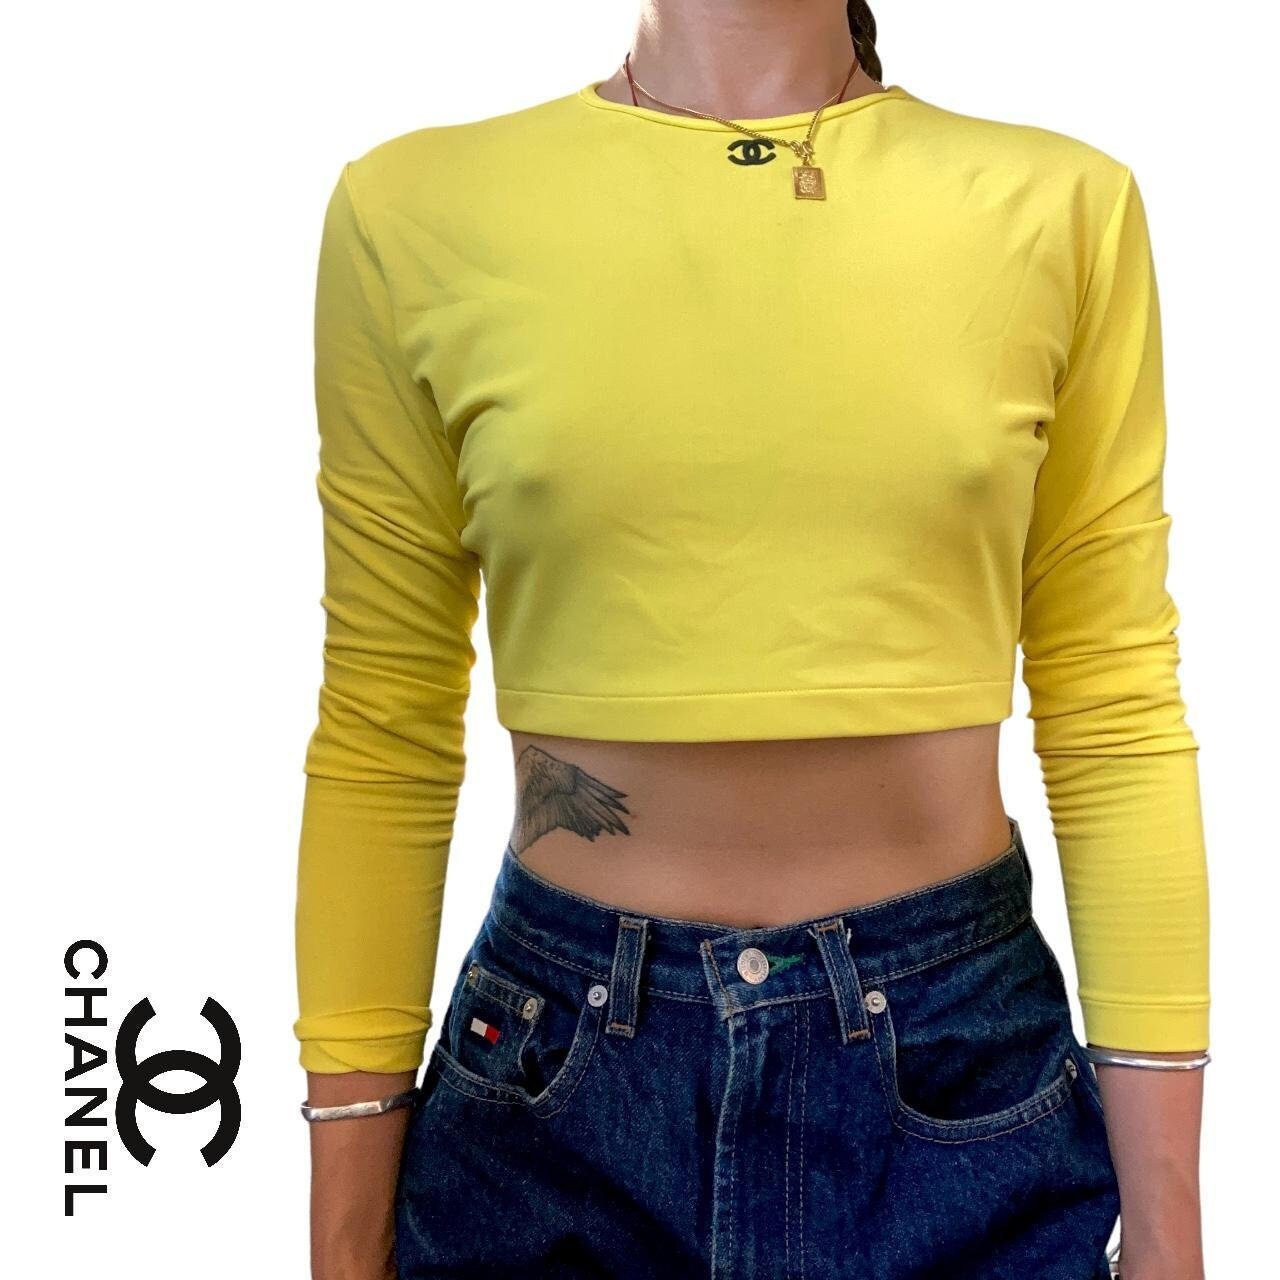 Chanel Vintage 2005 Crop Top - Neutrals Tops, Clothing - CHA971396